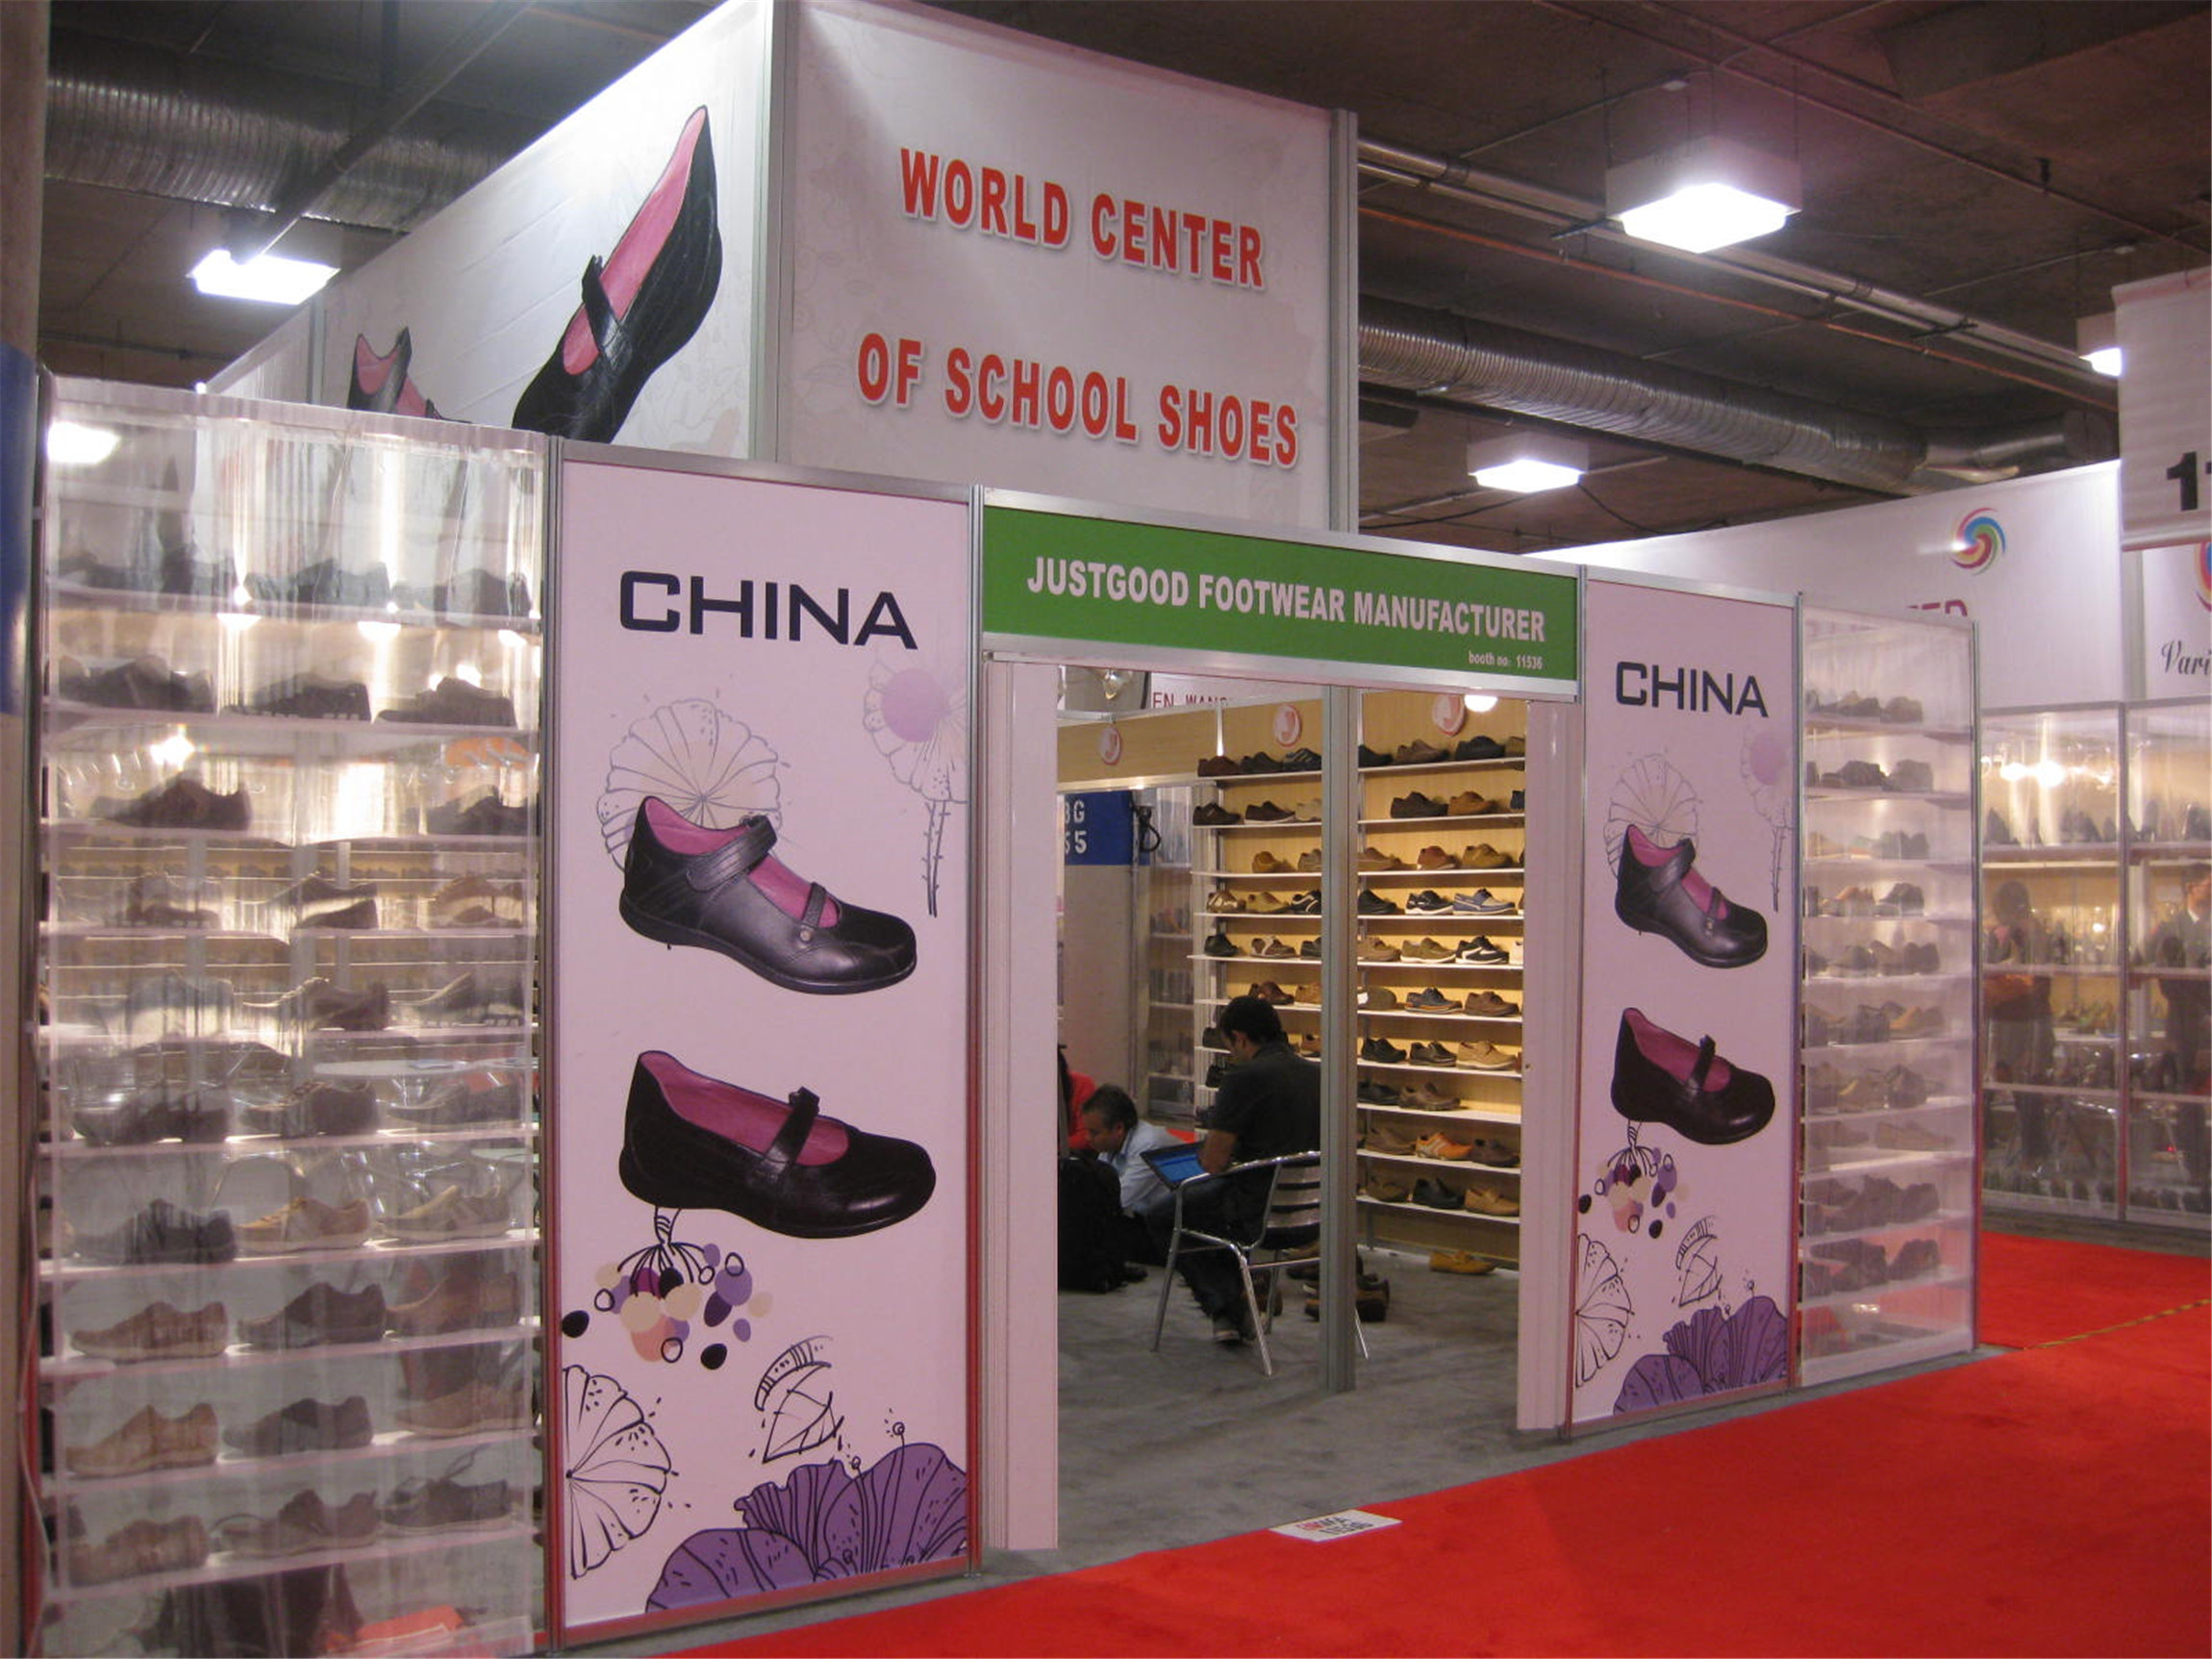 The US Exhibition in February, 2012